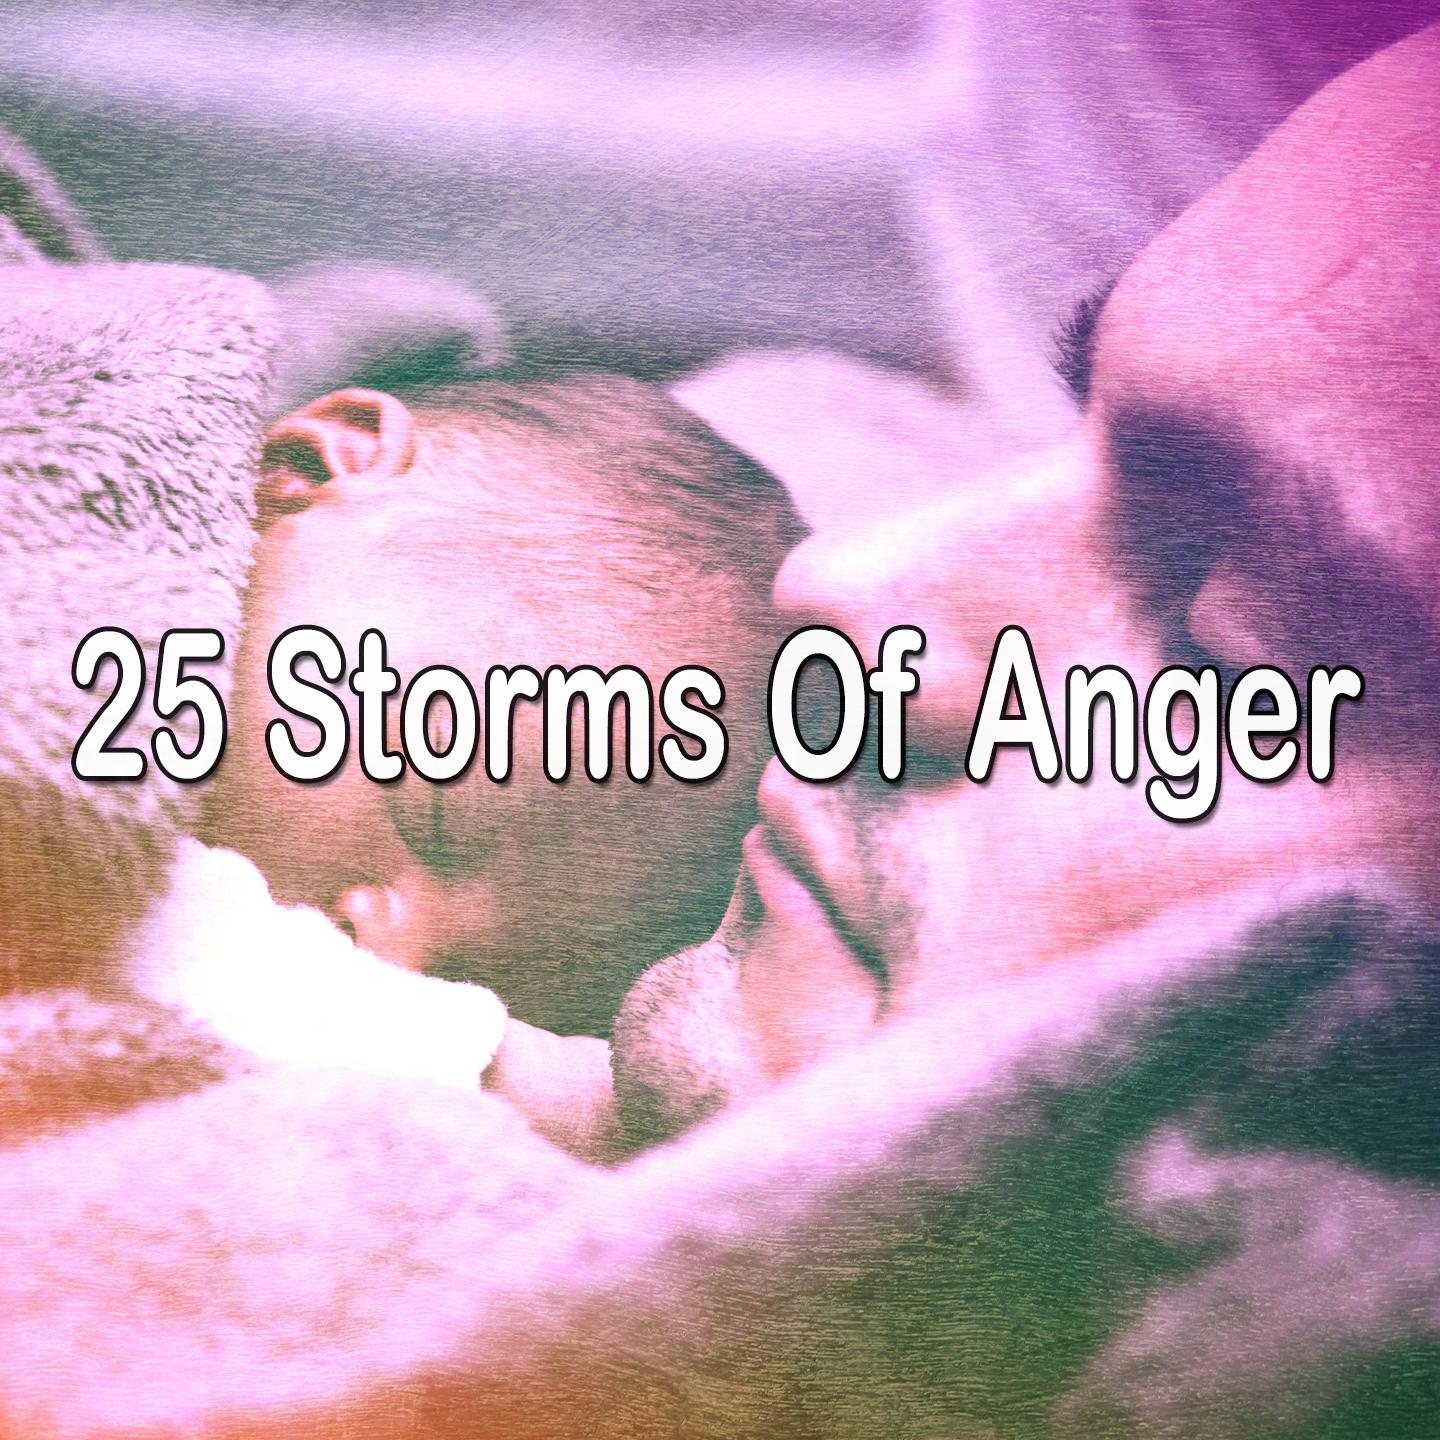 25 Storms Of Anger